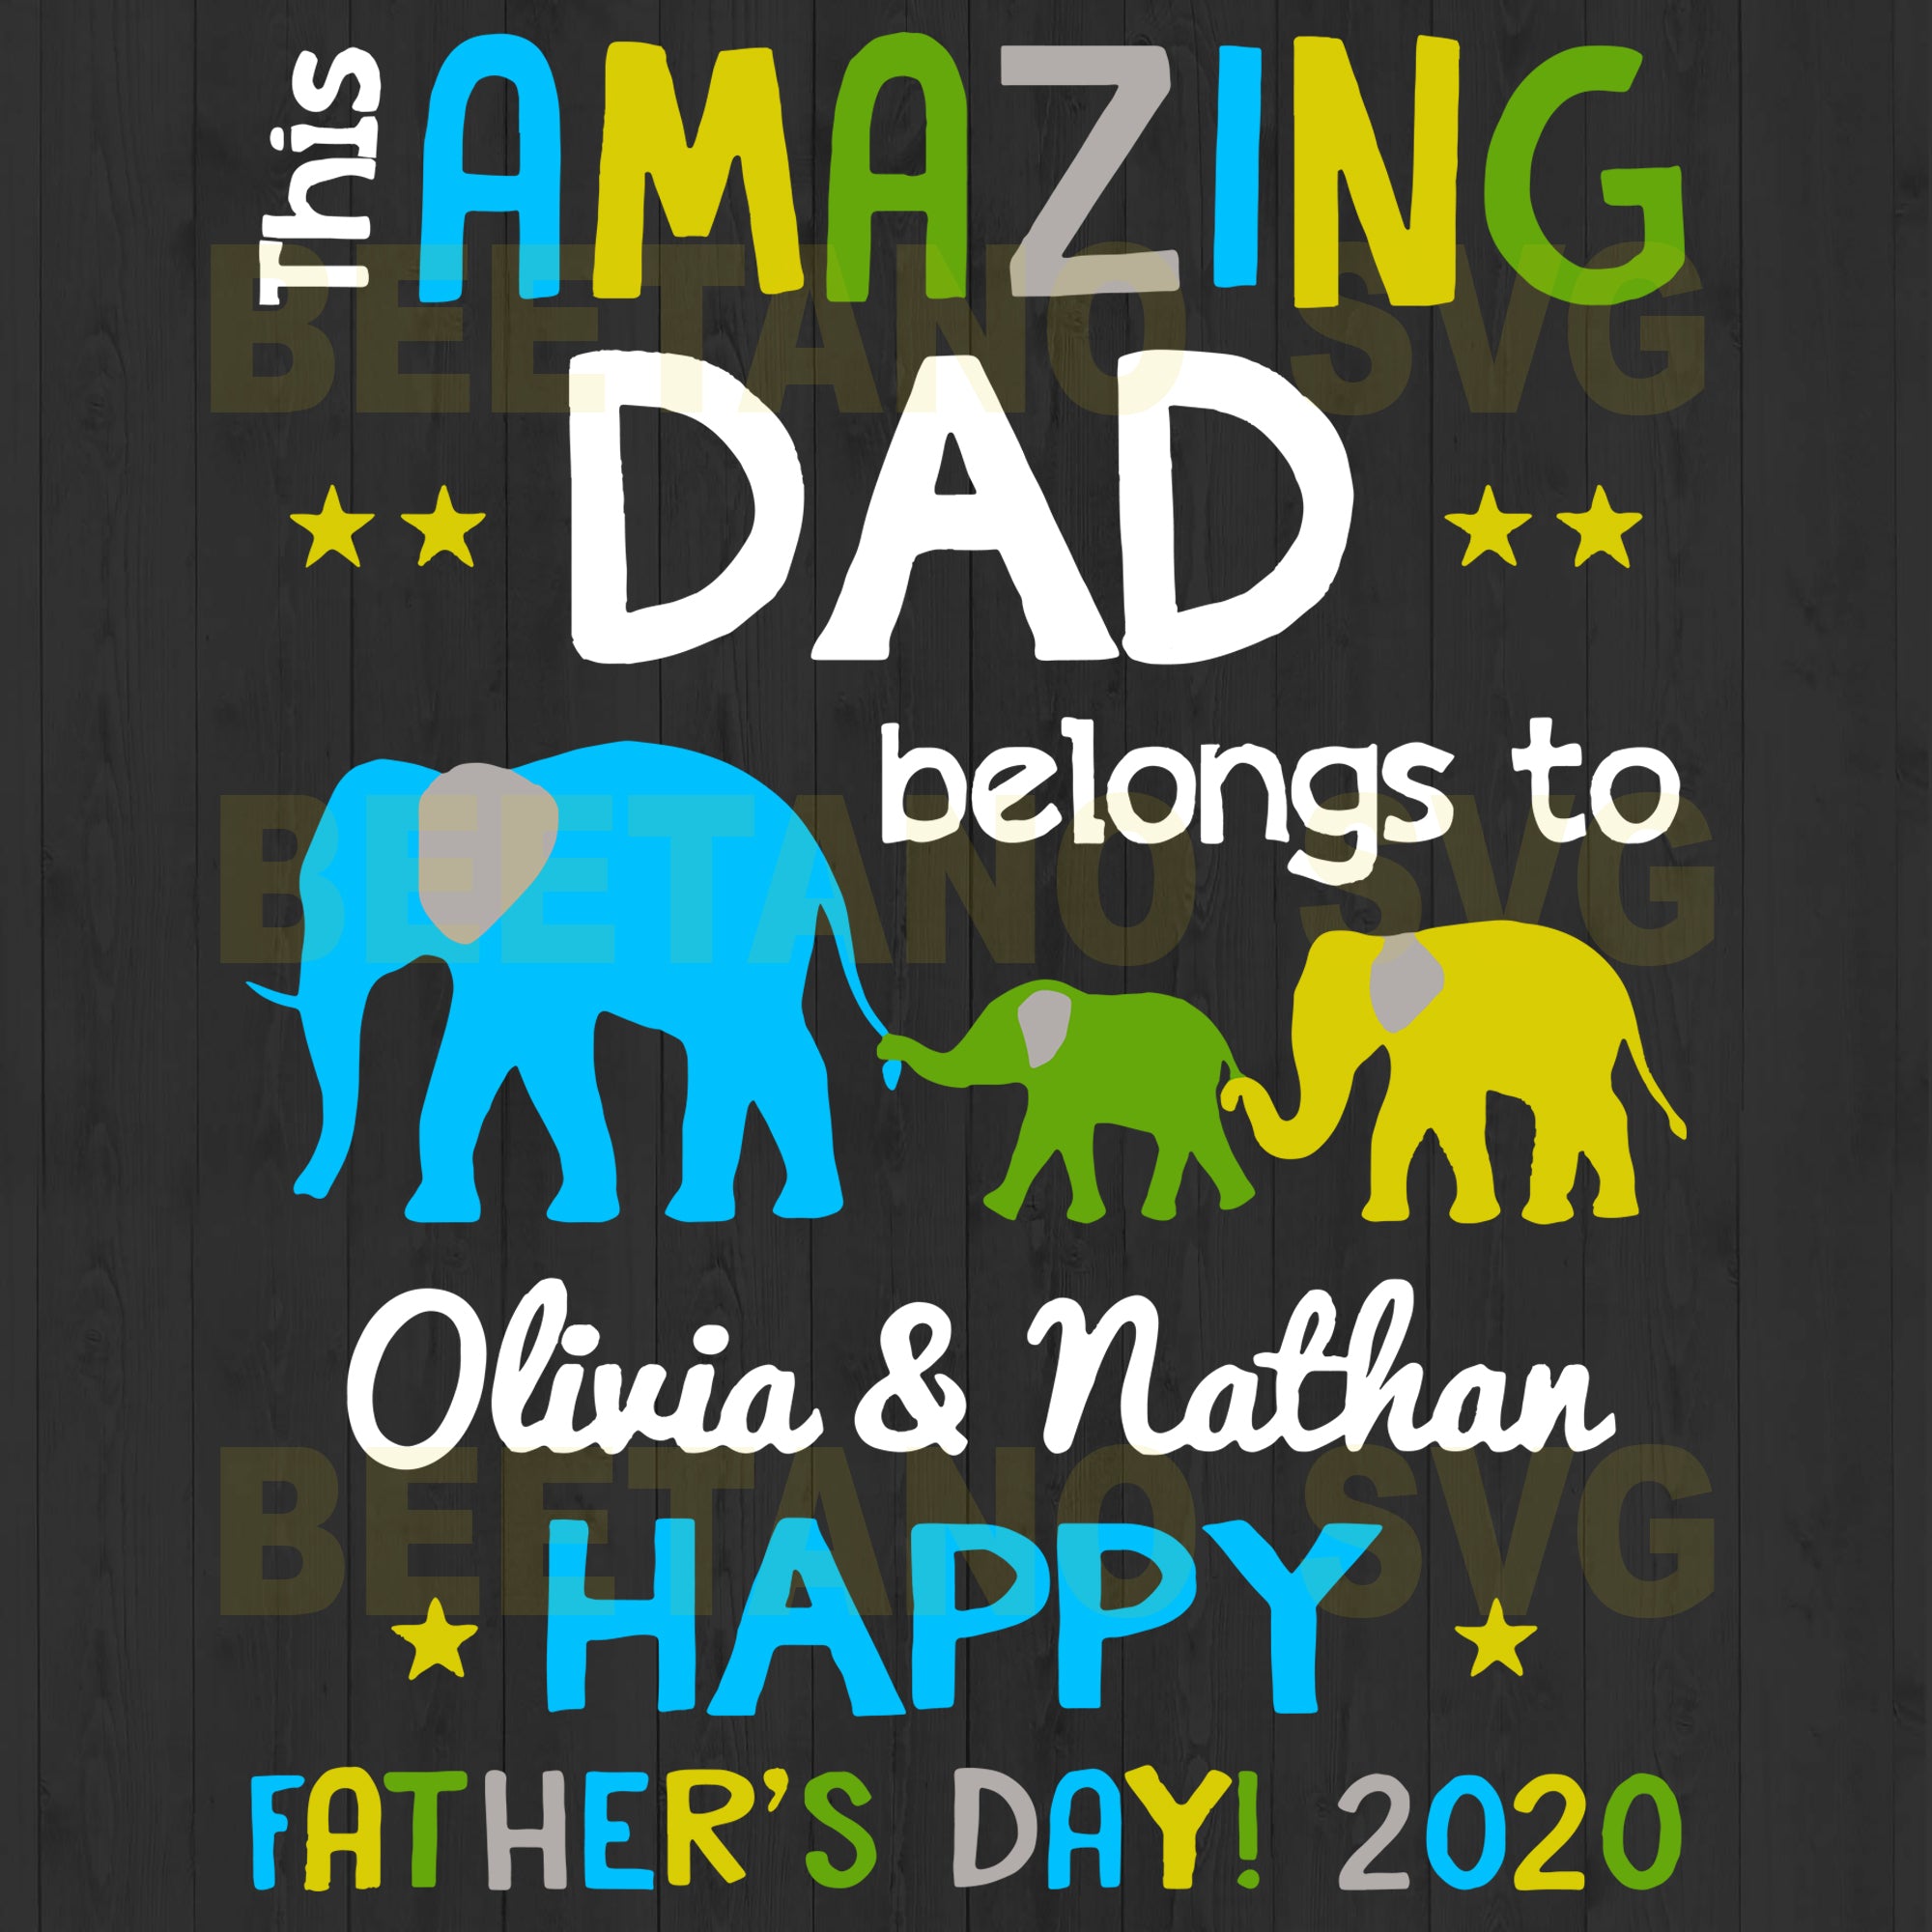 This Amazing Dad Belongs To Happy Father S Day Svg Files For Instant D